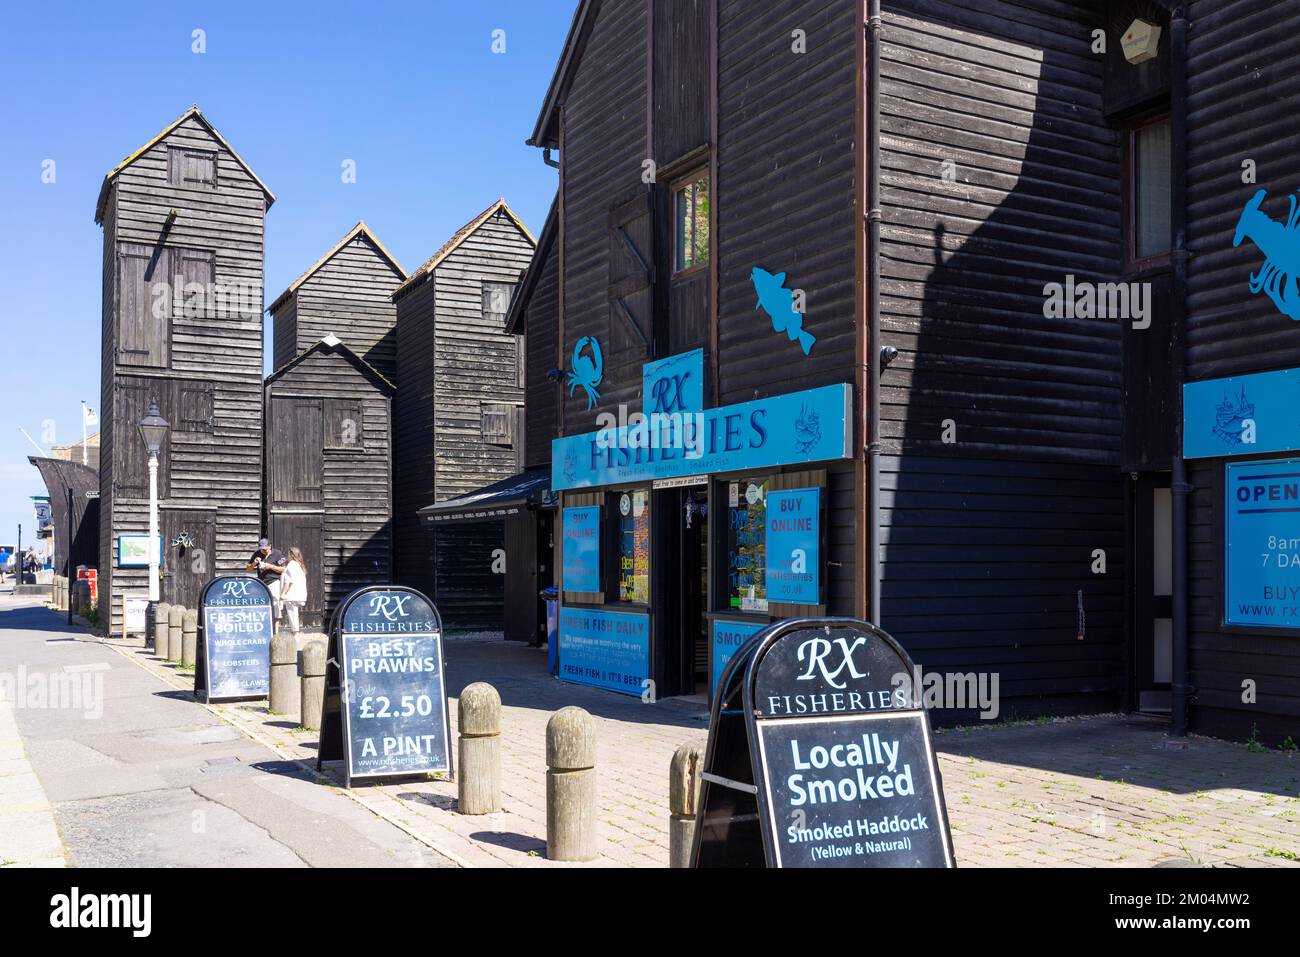 Hastings Old Town Fisheries on the Stade avec des huttes traditionnelles en filet peint noir Hasting's Net Shops Hastings East Sussex Angleterre GB Europe Banque D'Images